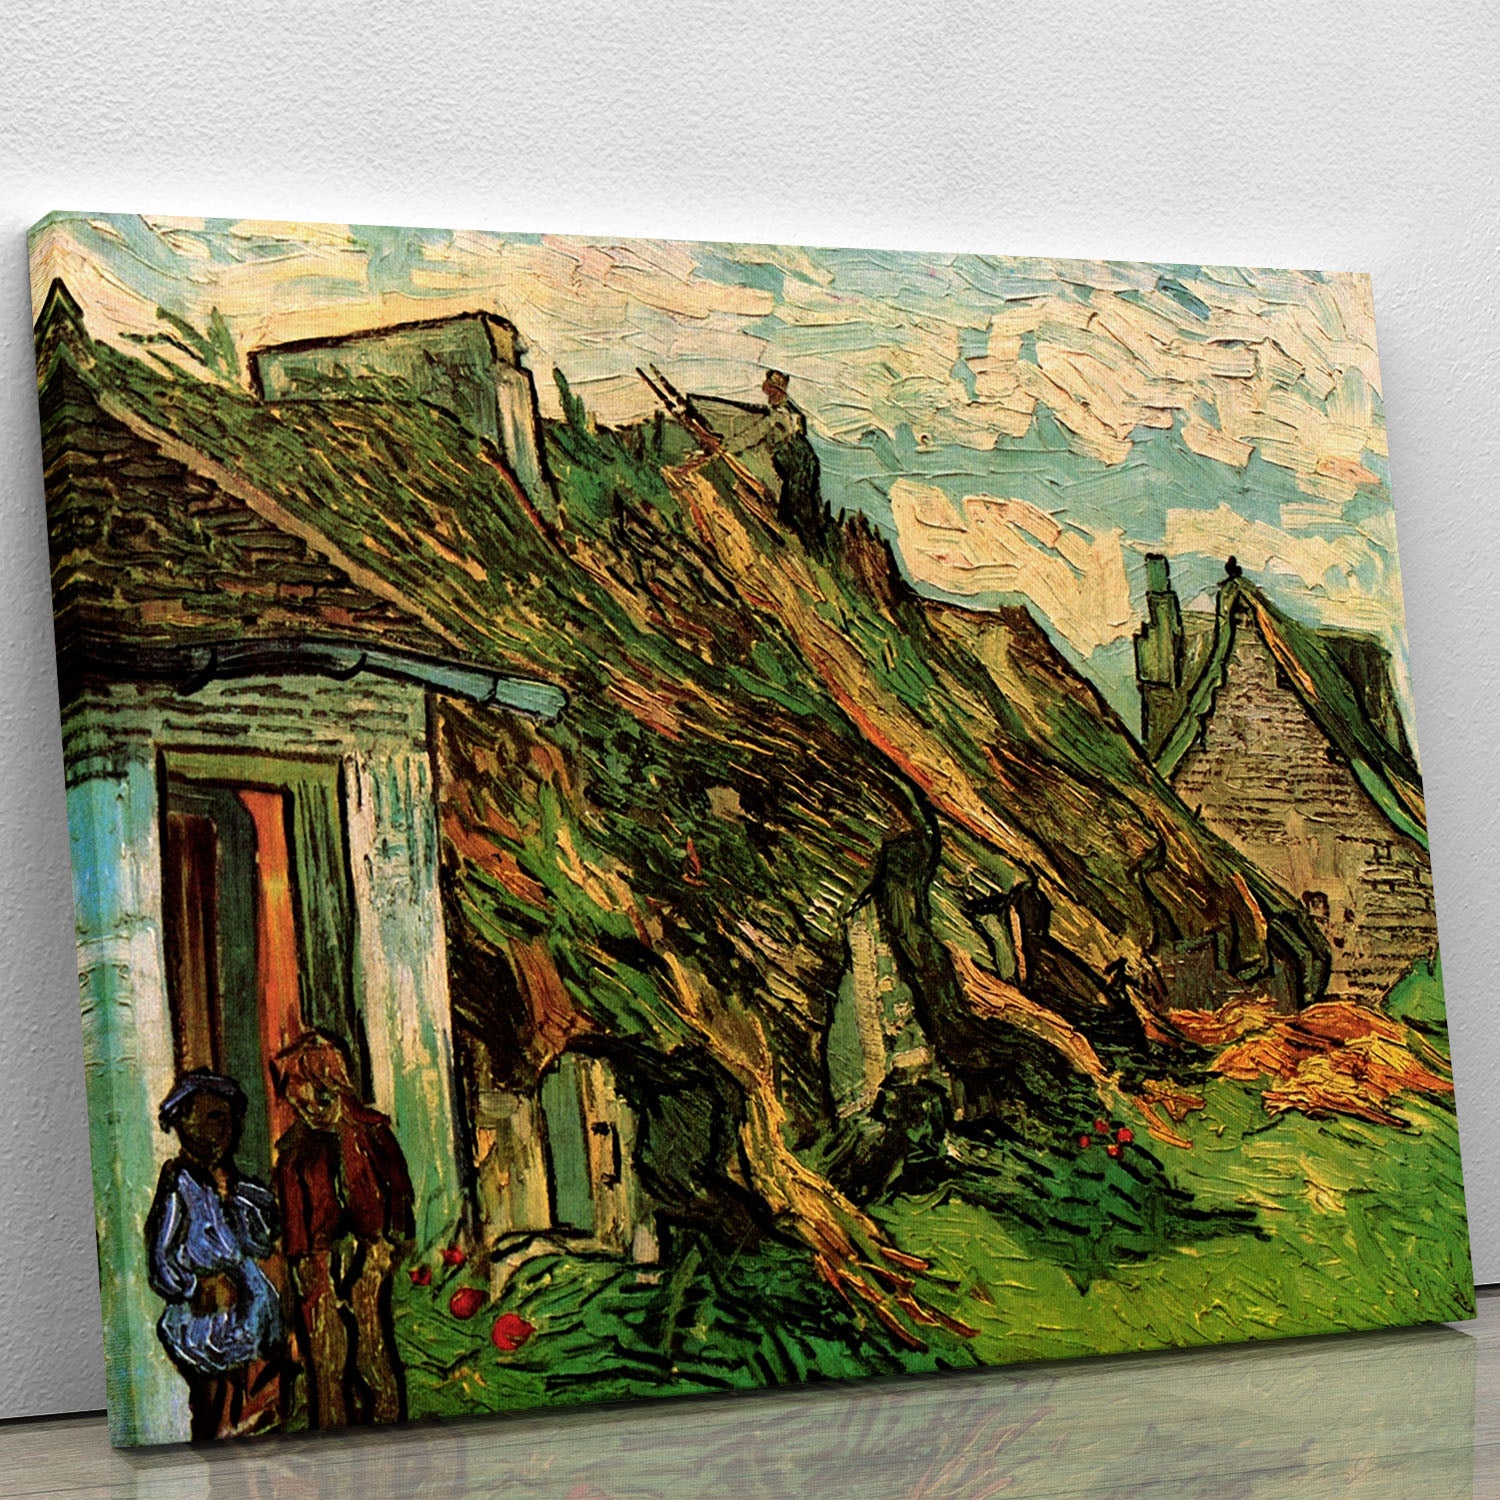 Thatched Sandstone Cottages in Chaponval by Van Gogh Canvas Print or Poster - Canvas Art Rocks - 1